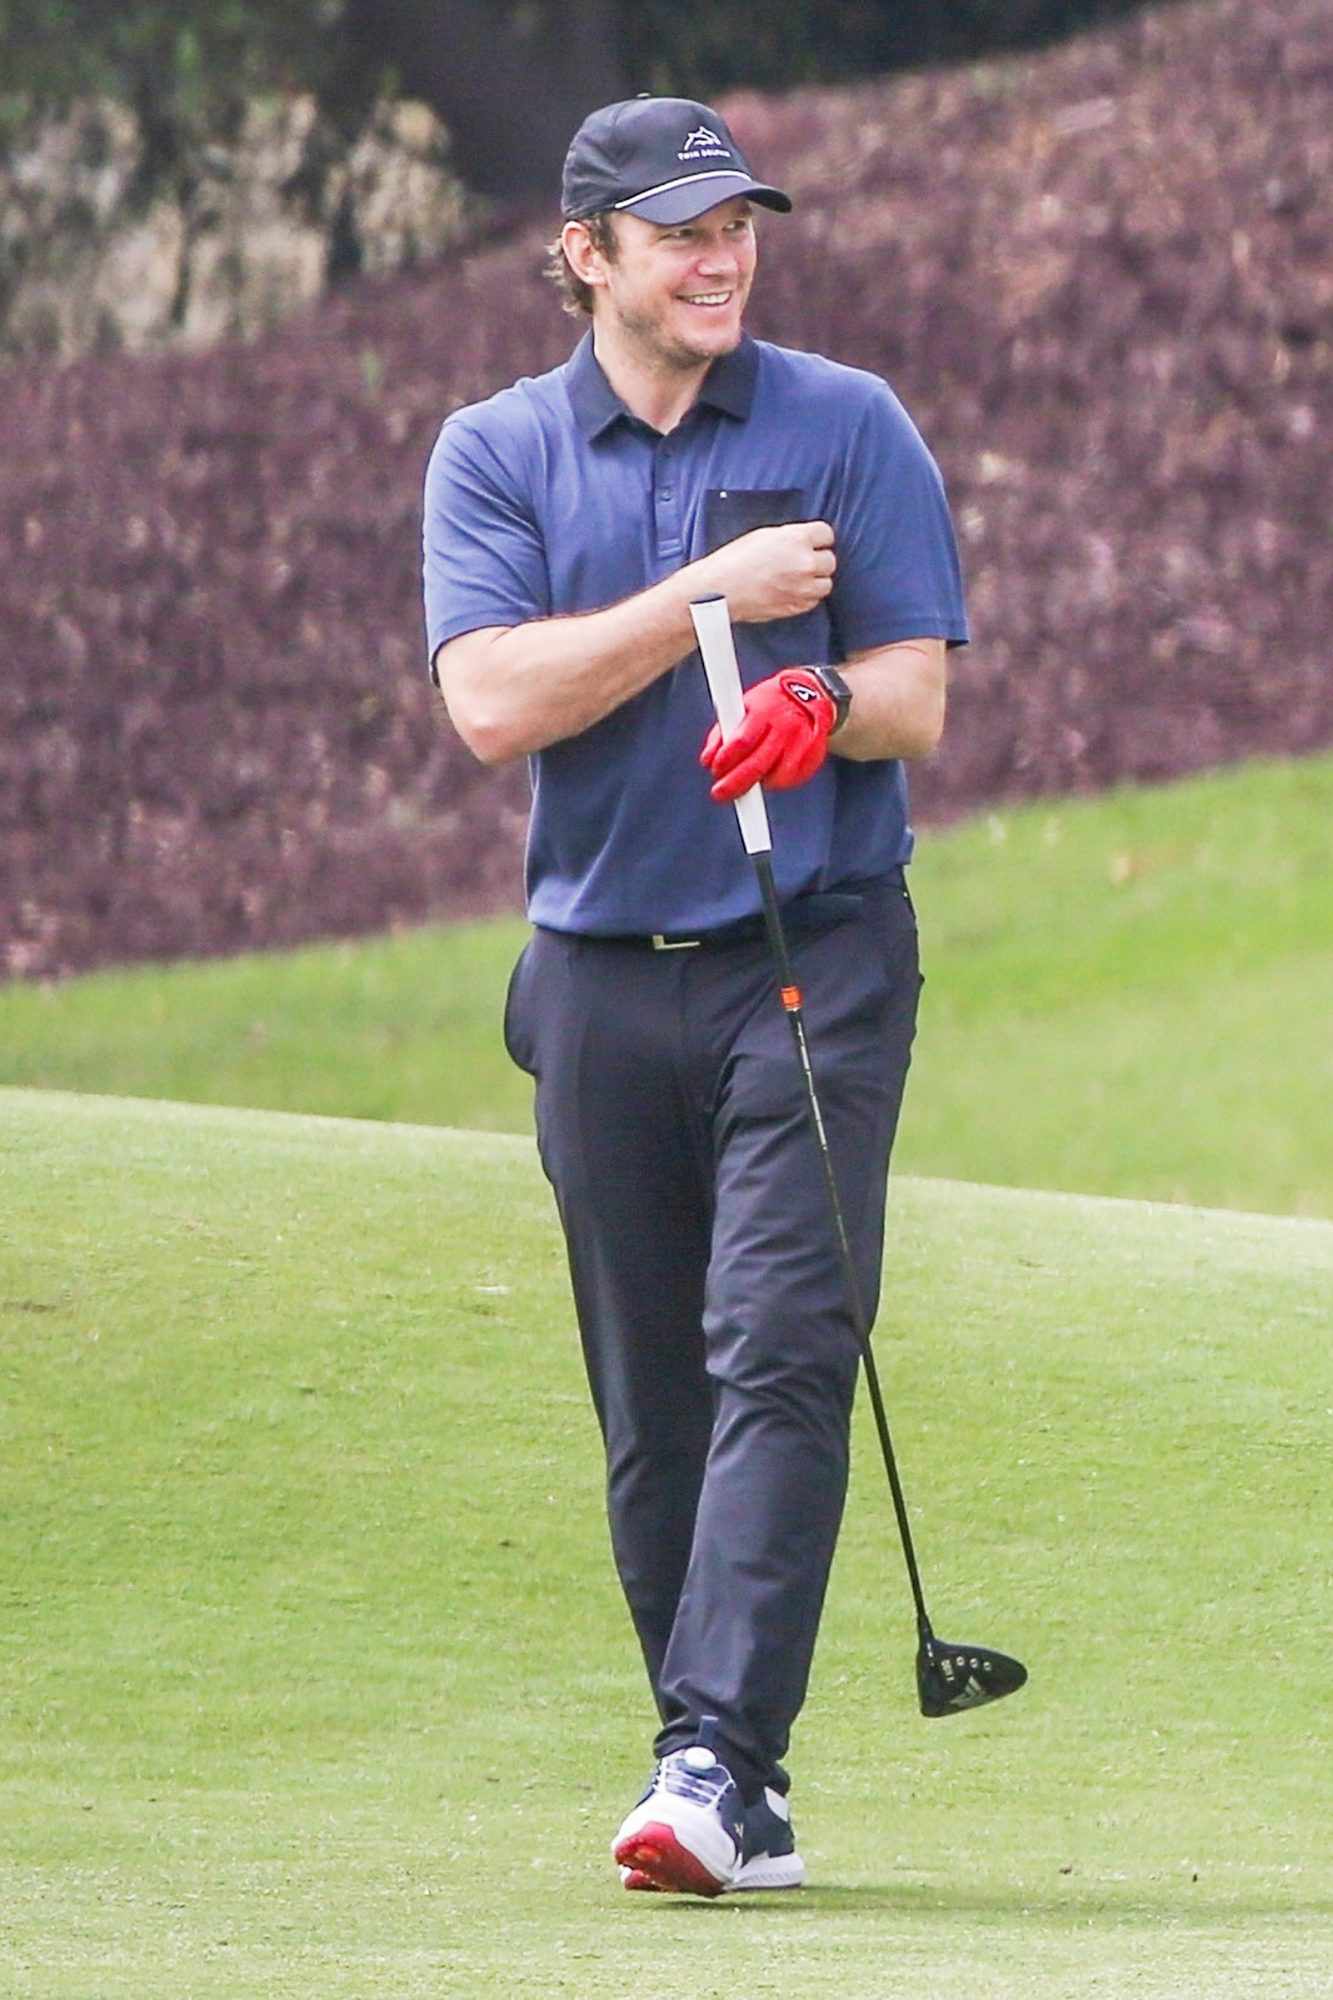 Chris Pratt works on his golf swing at a range session in Los Angeles